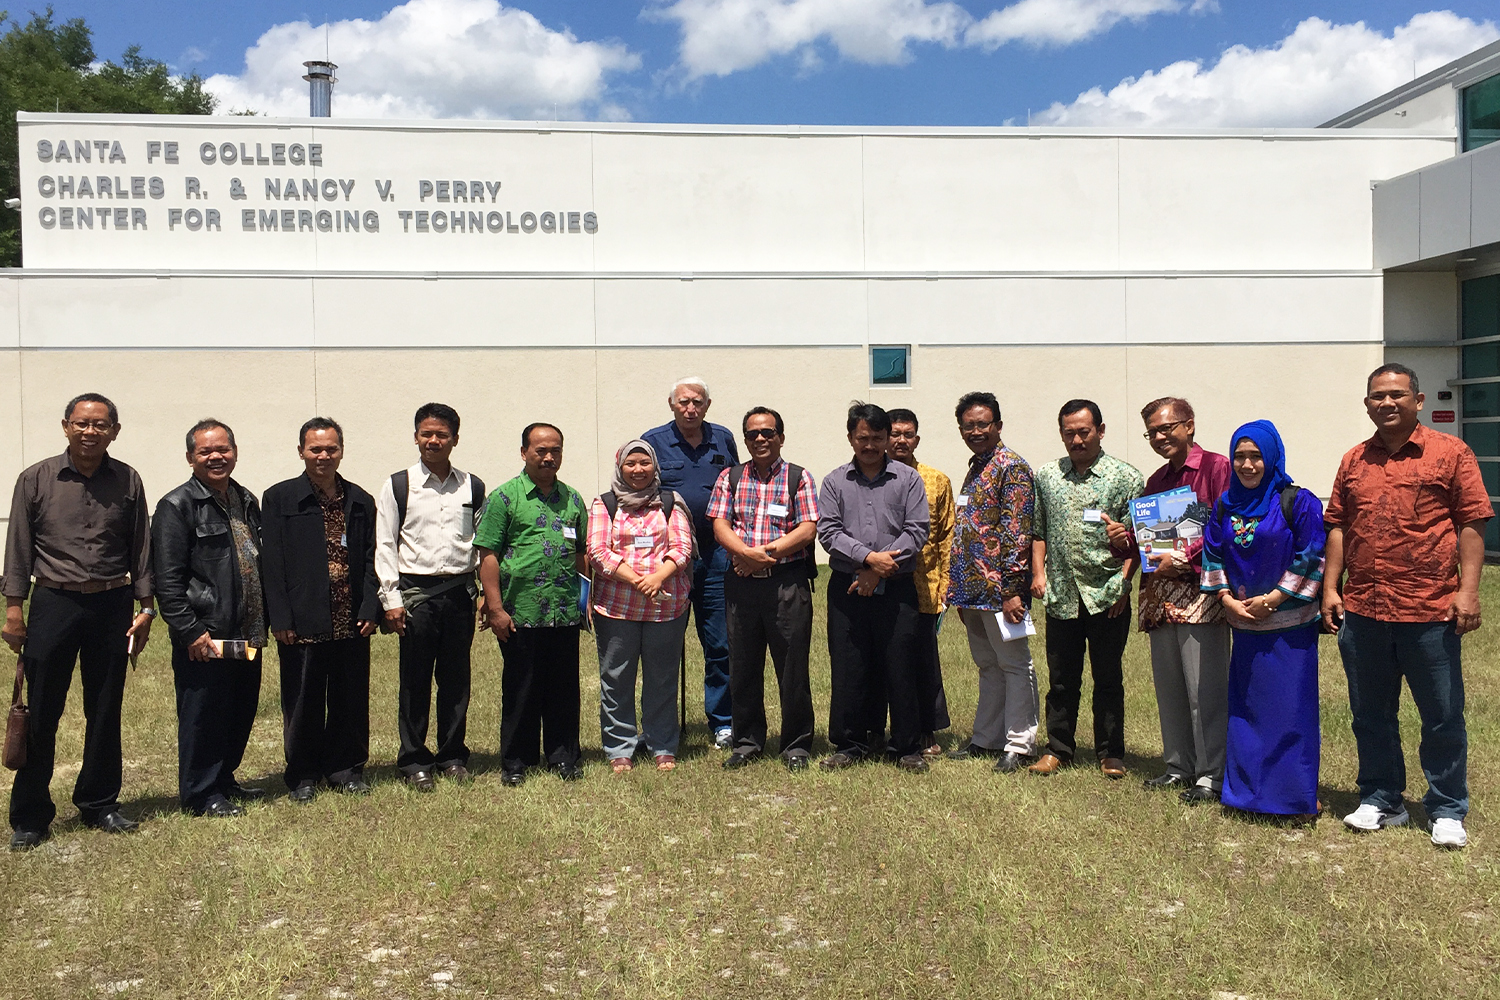 "Indonesia CCAP group in front of Santa Fe College"